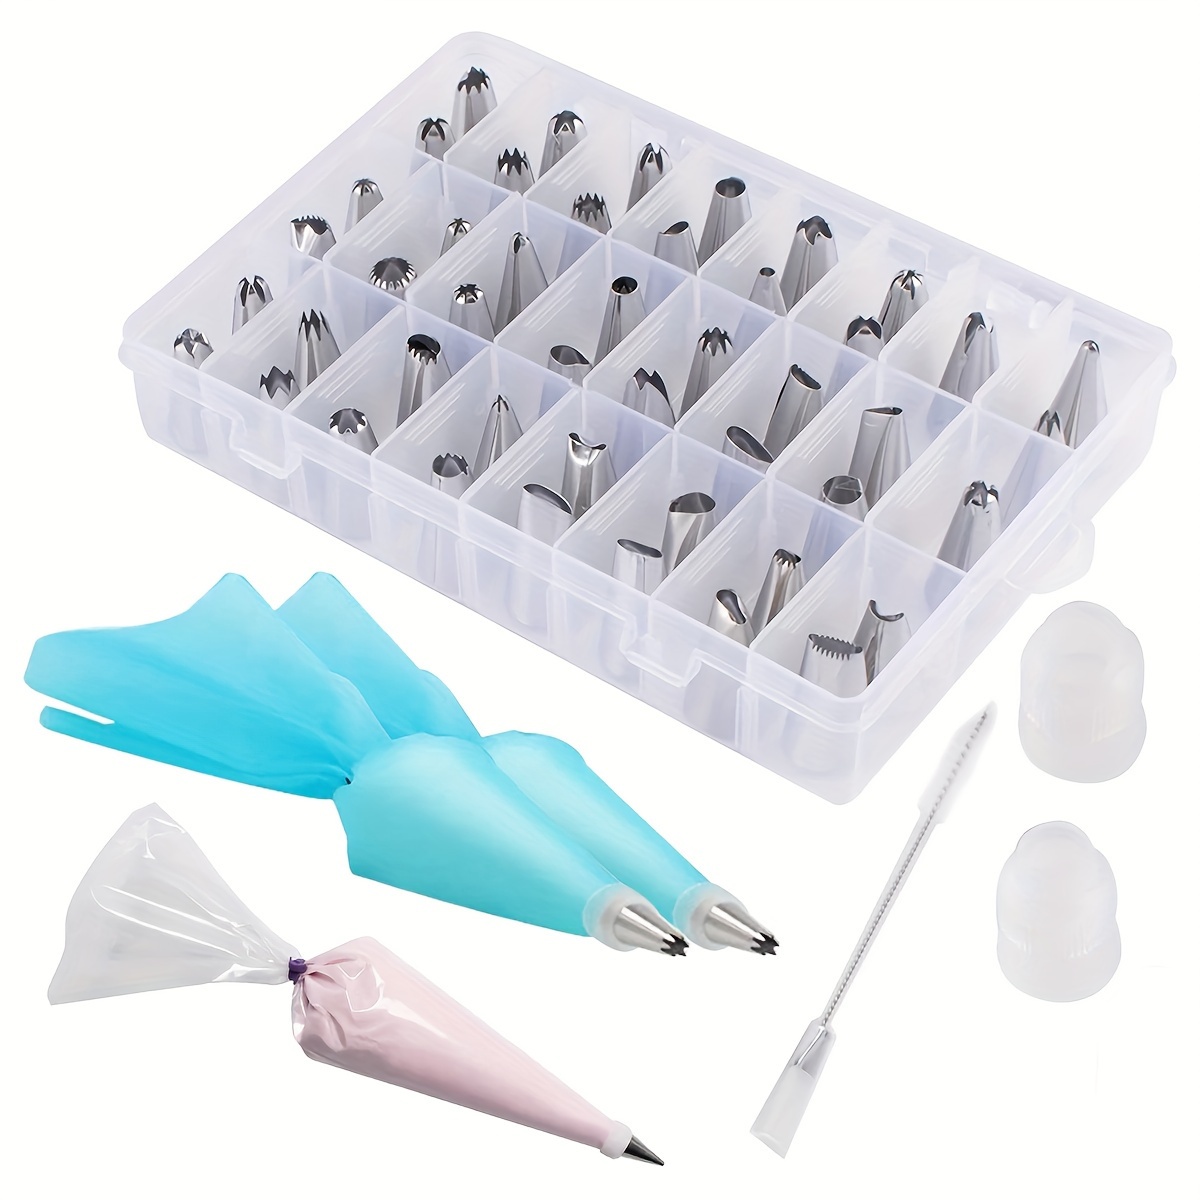 

63pcs Piping Bag And Tips Set Stainless Steel Cake Decorating Supplies Kit With Cleaning Brush Pastry Bag Icing Bag And Coupler Premium Cupcake Cookie Baking Tool For Kitchen Cake Decorating Kit